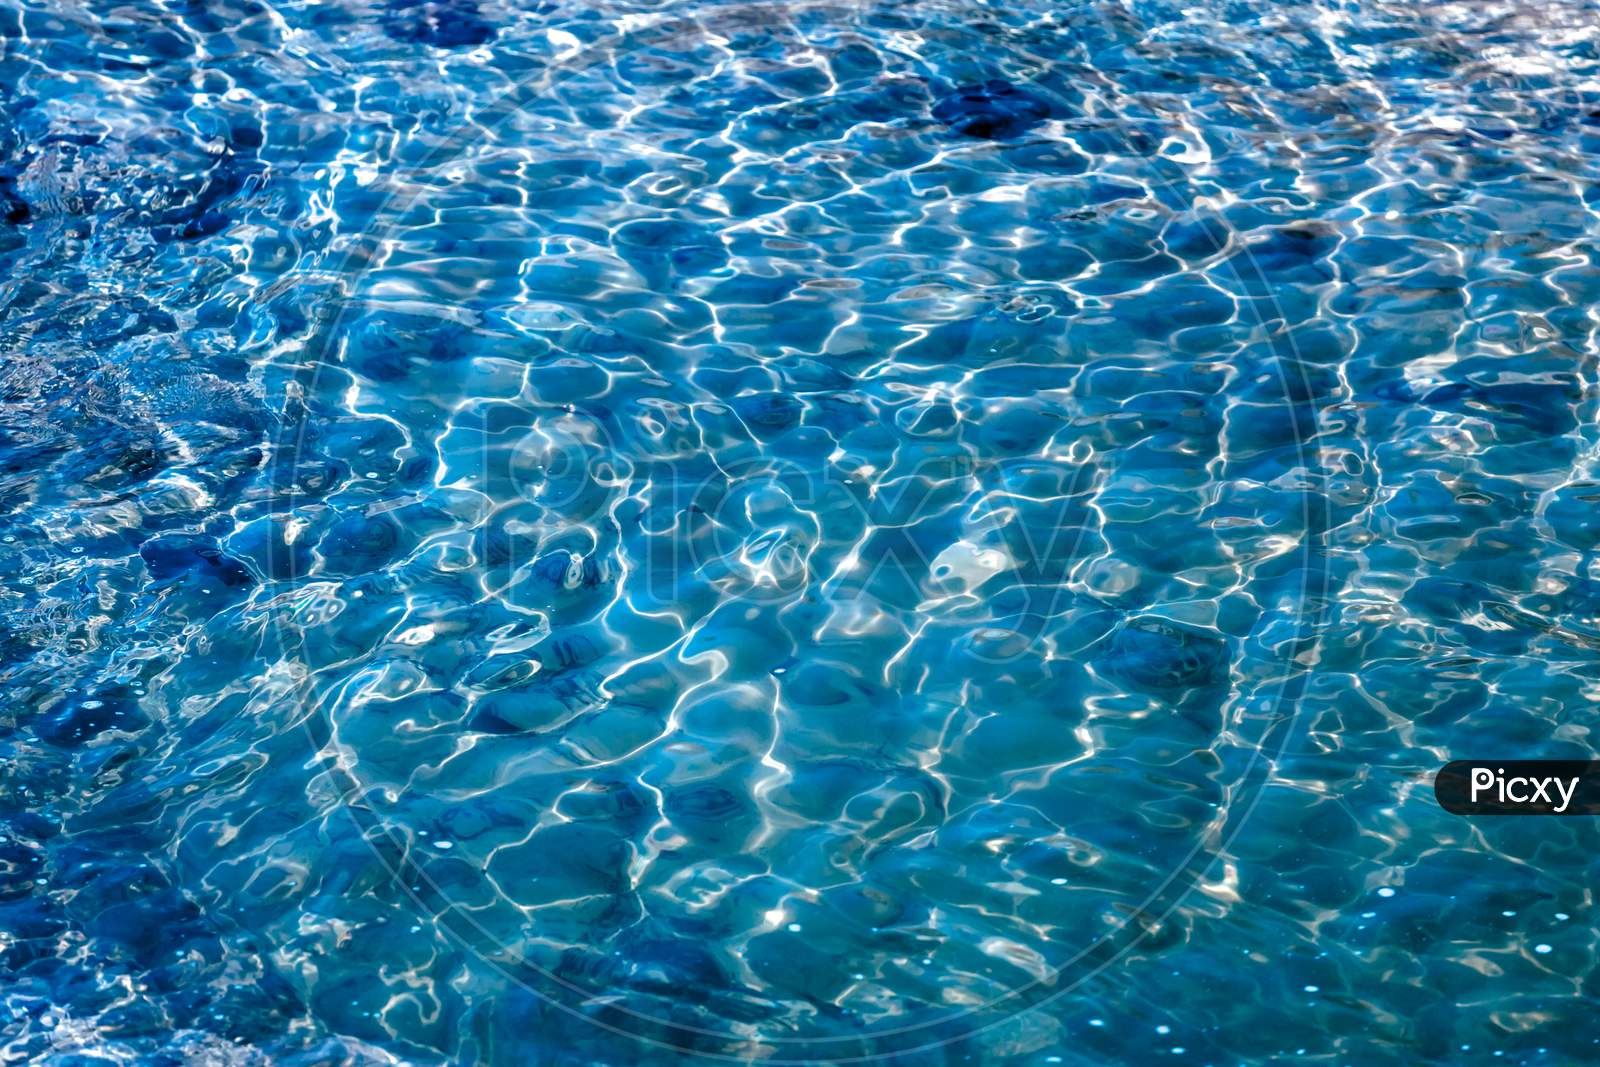 cool blue water patterns